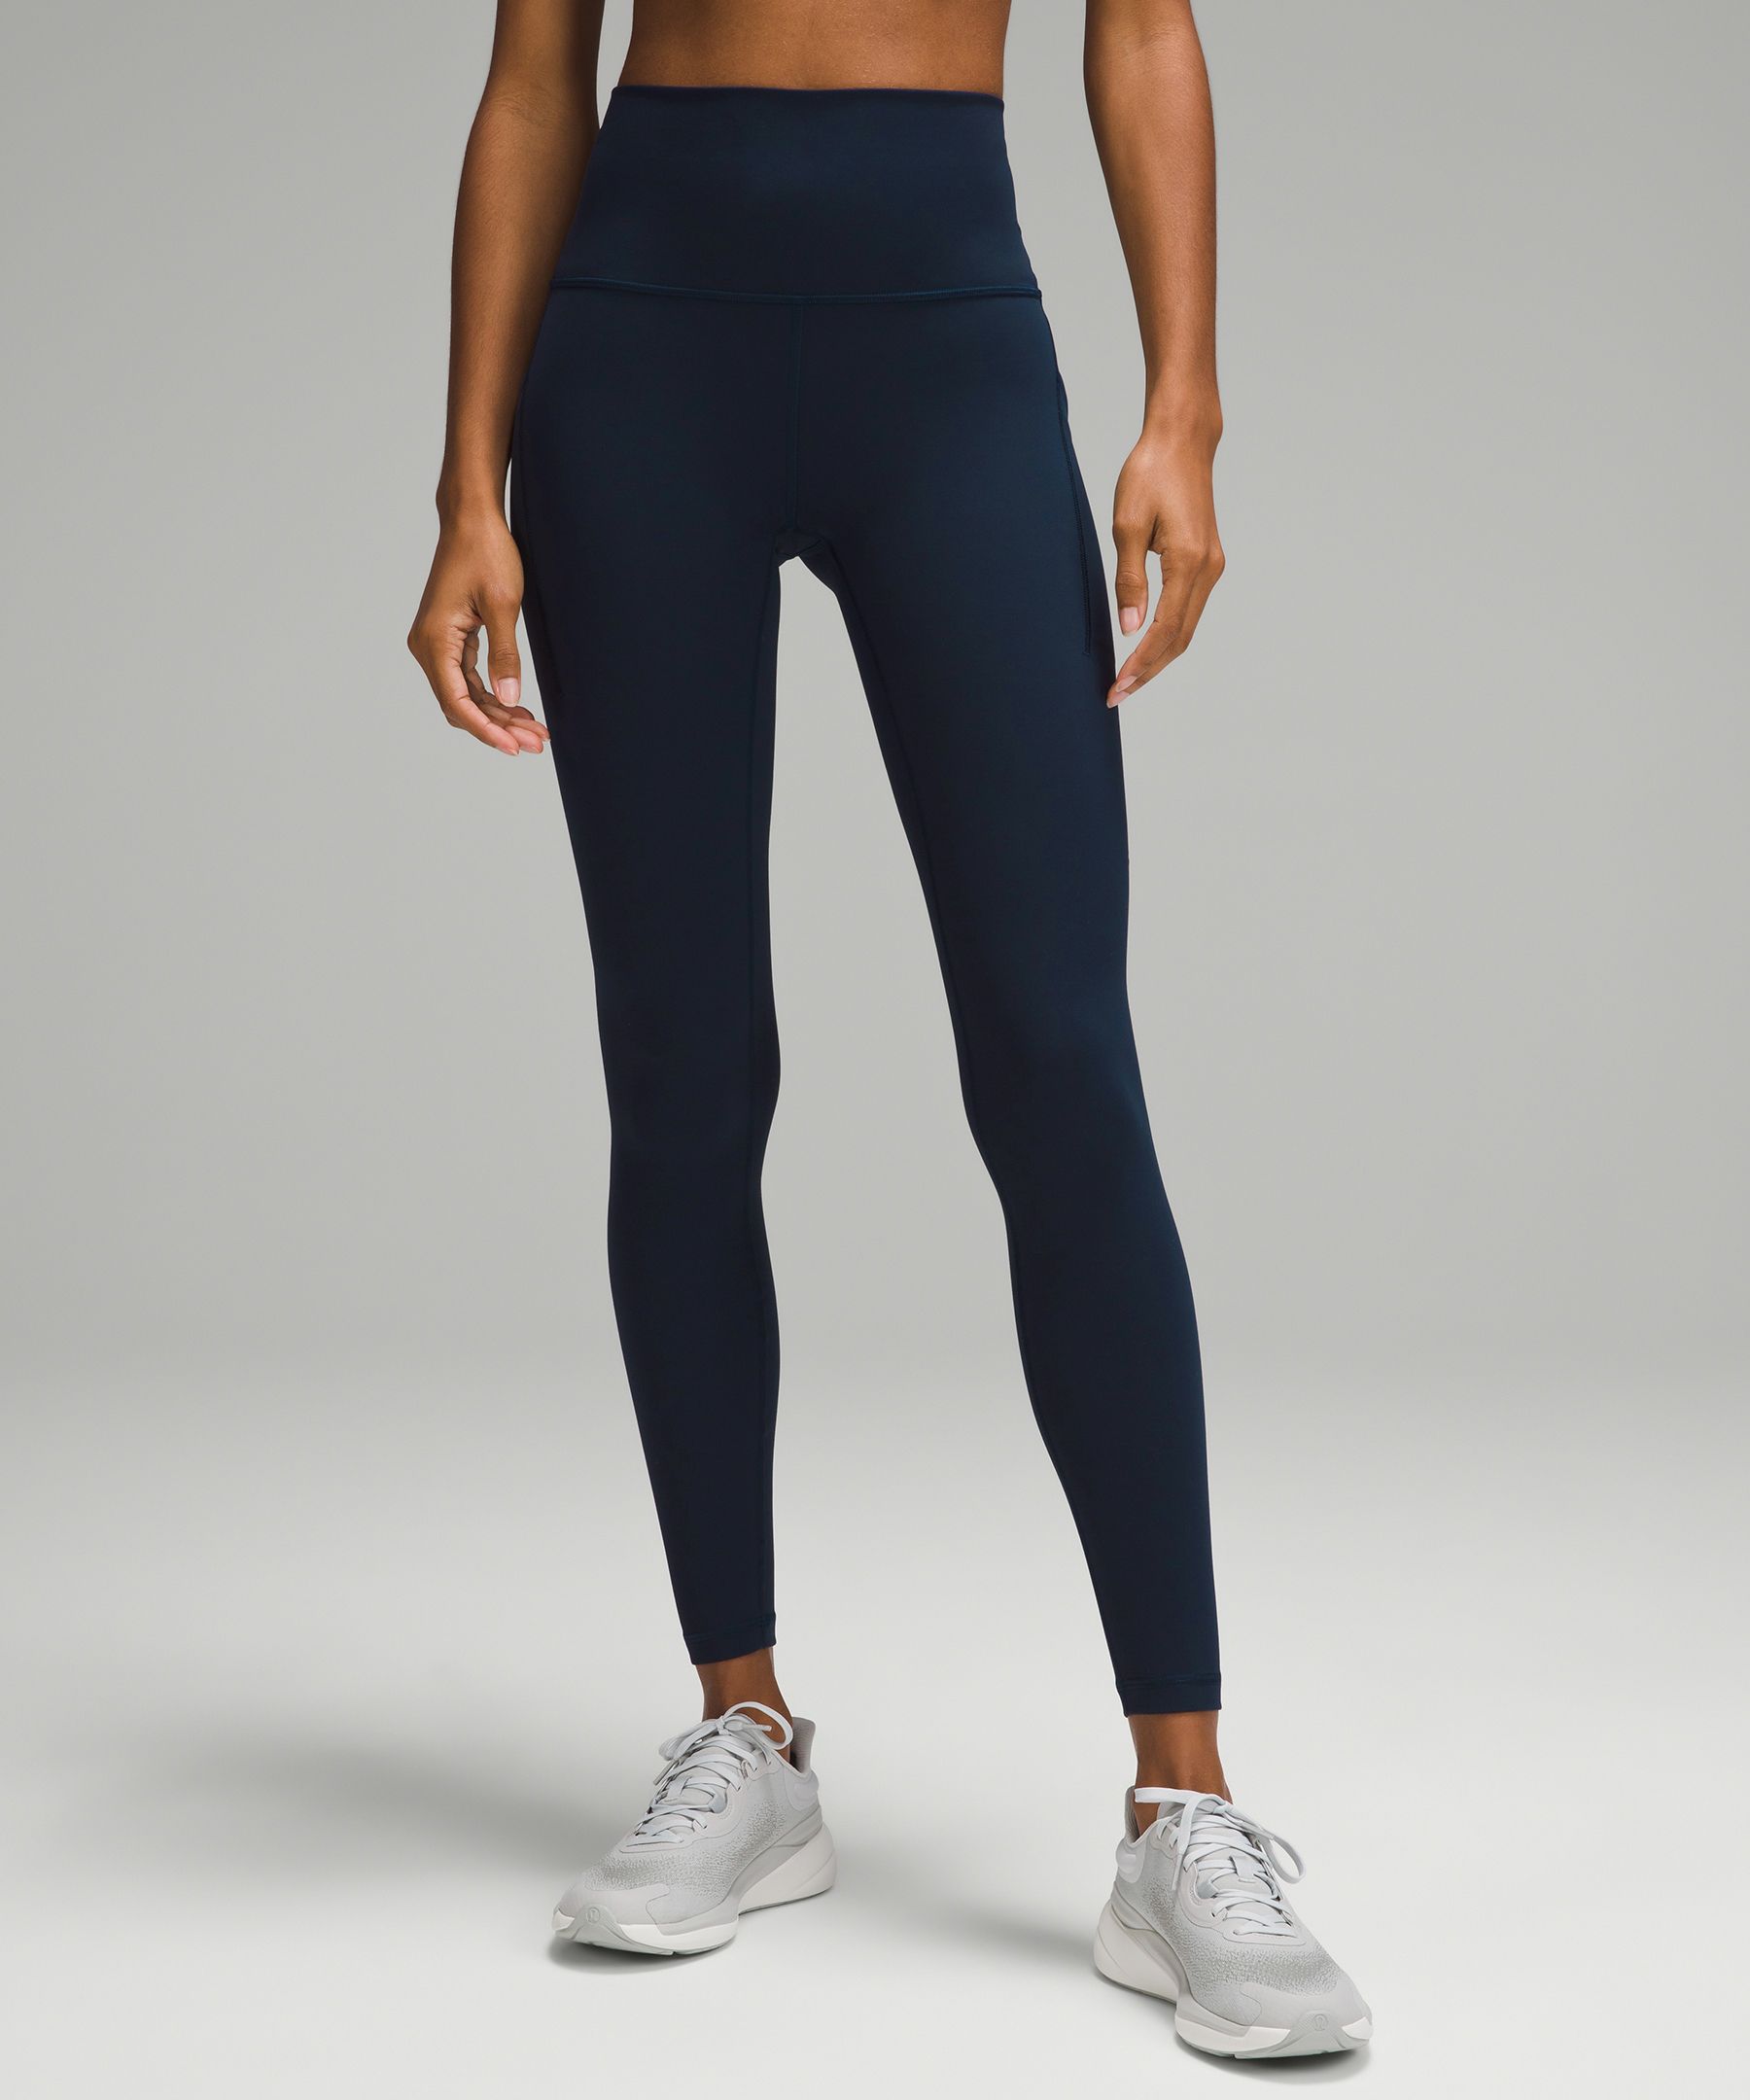 SOFTREME. Blue Ultrasoft Leggings with side pockets – Pineapple Athleisure